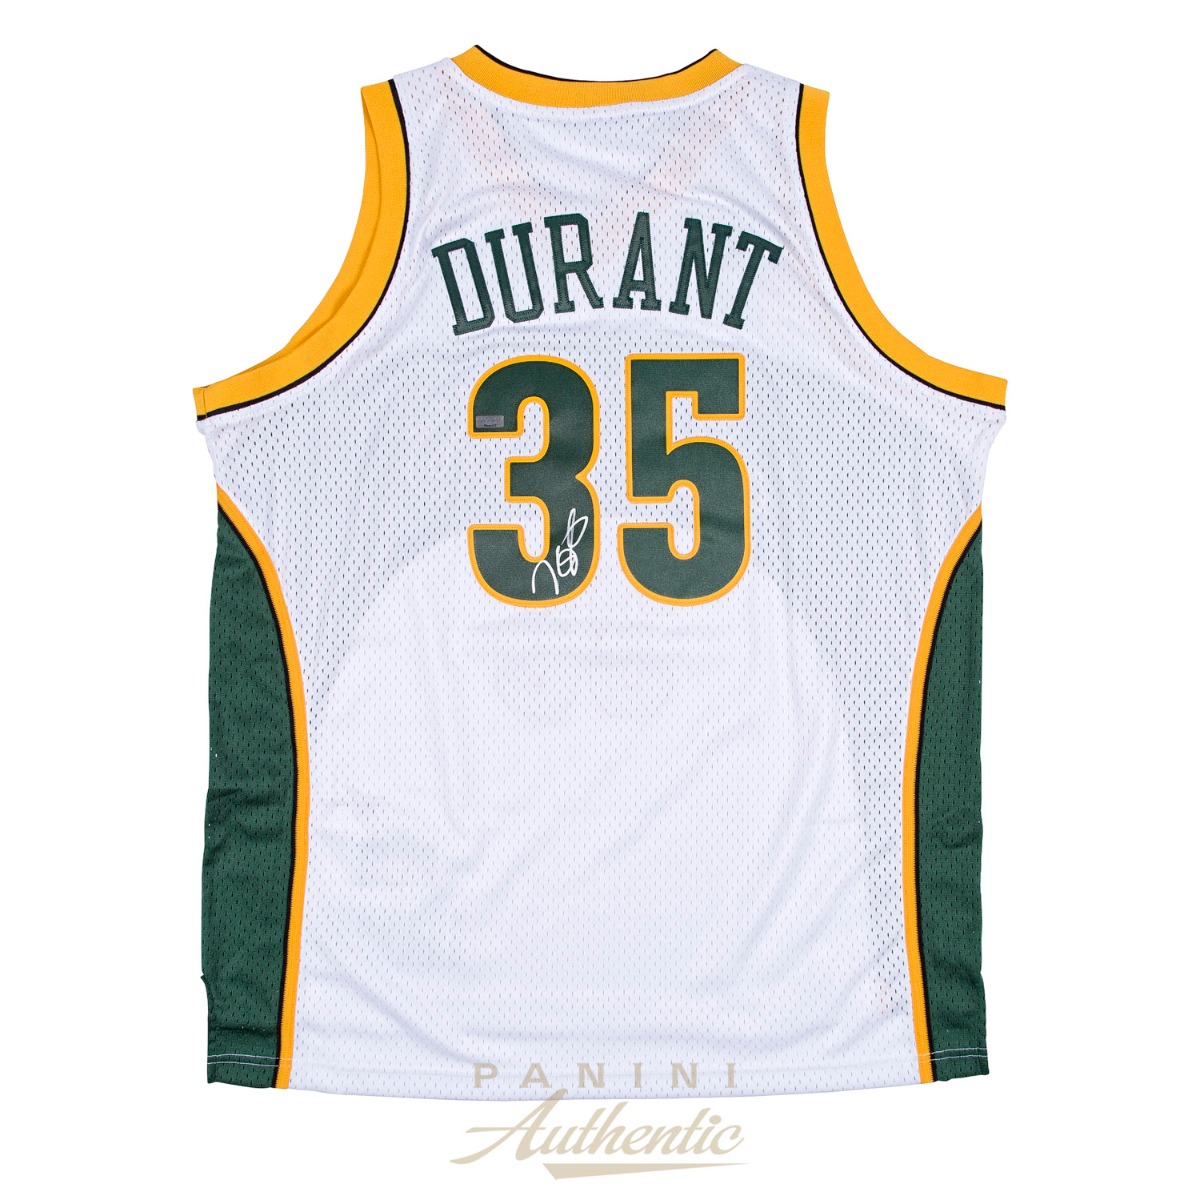 kd signed jersey